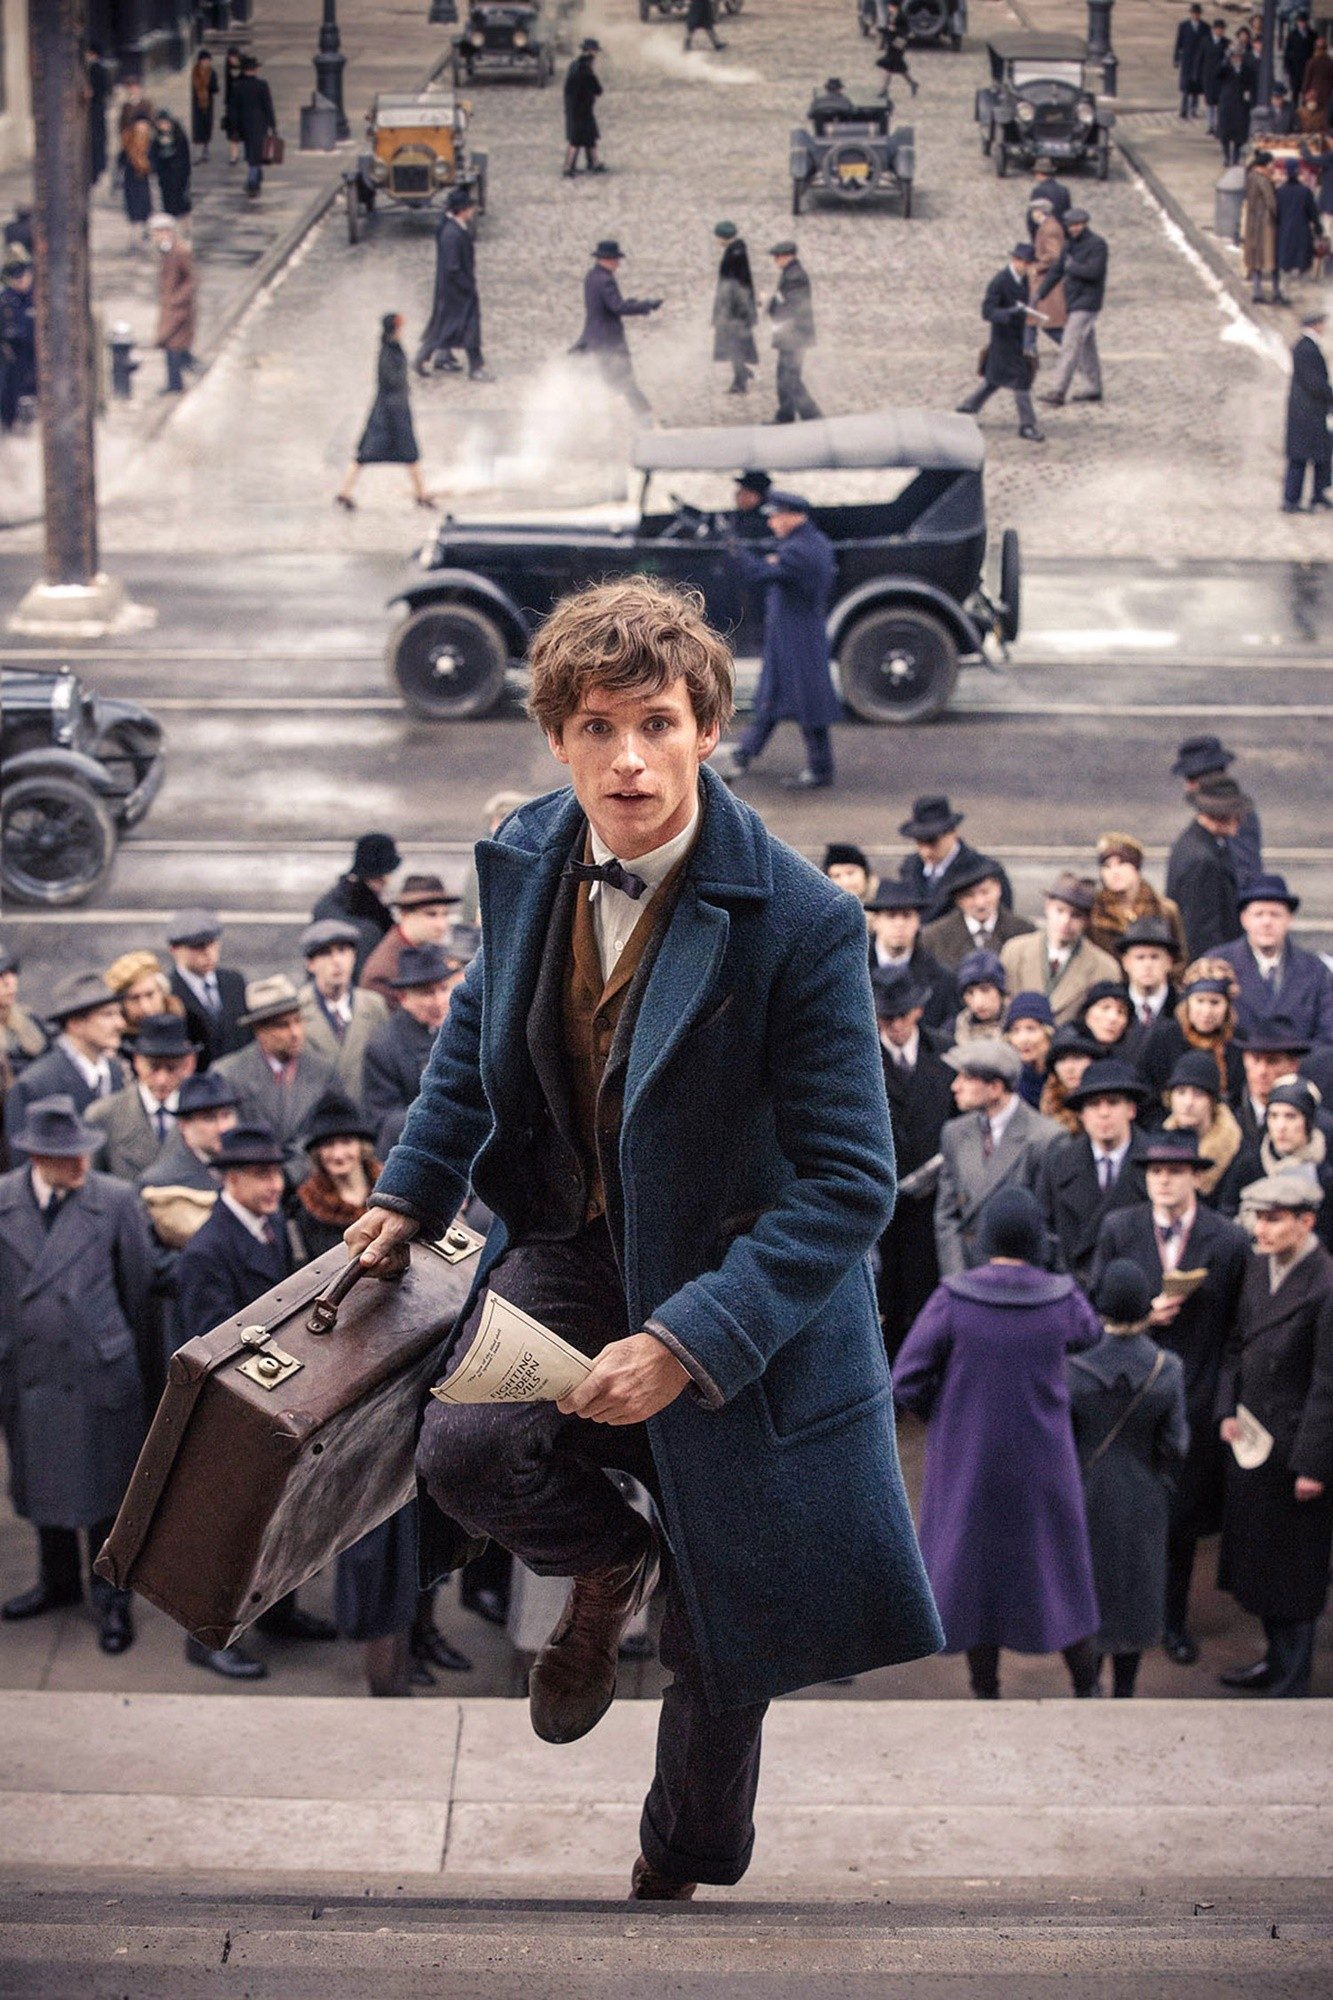 Eddie Redmayne stars as Newt Scamander in Warner Bros. Pictures' Fantastic Beasts and Where to Find Them (2016)